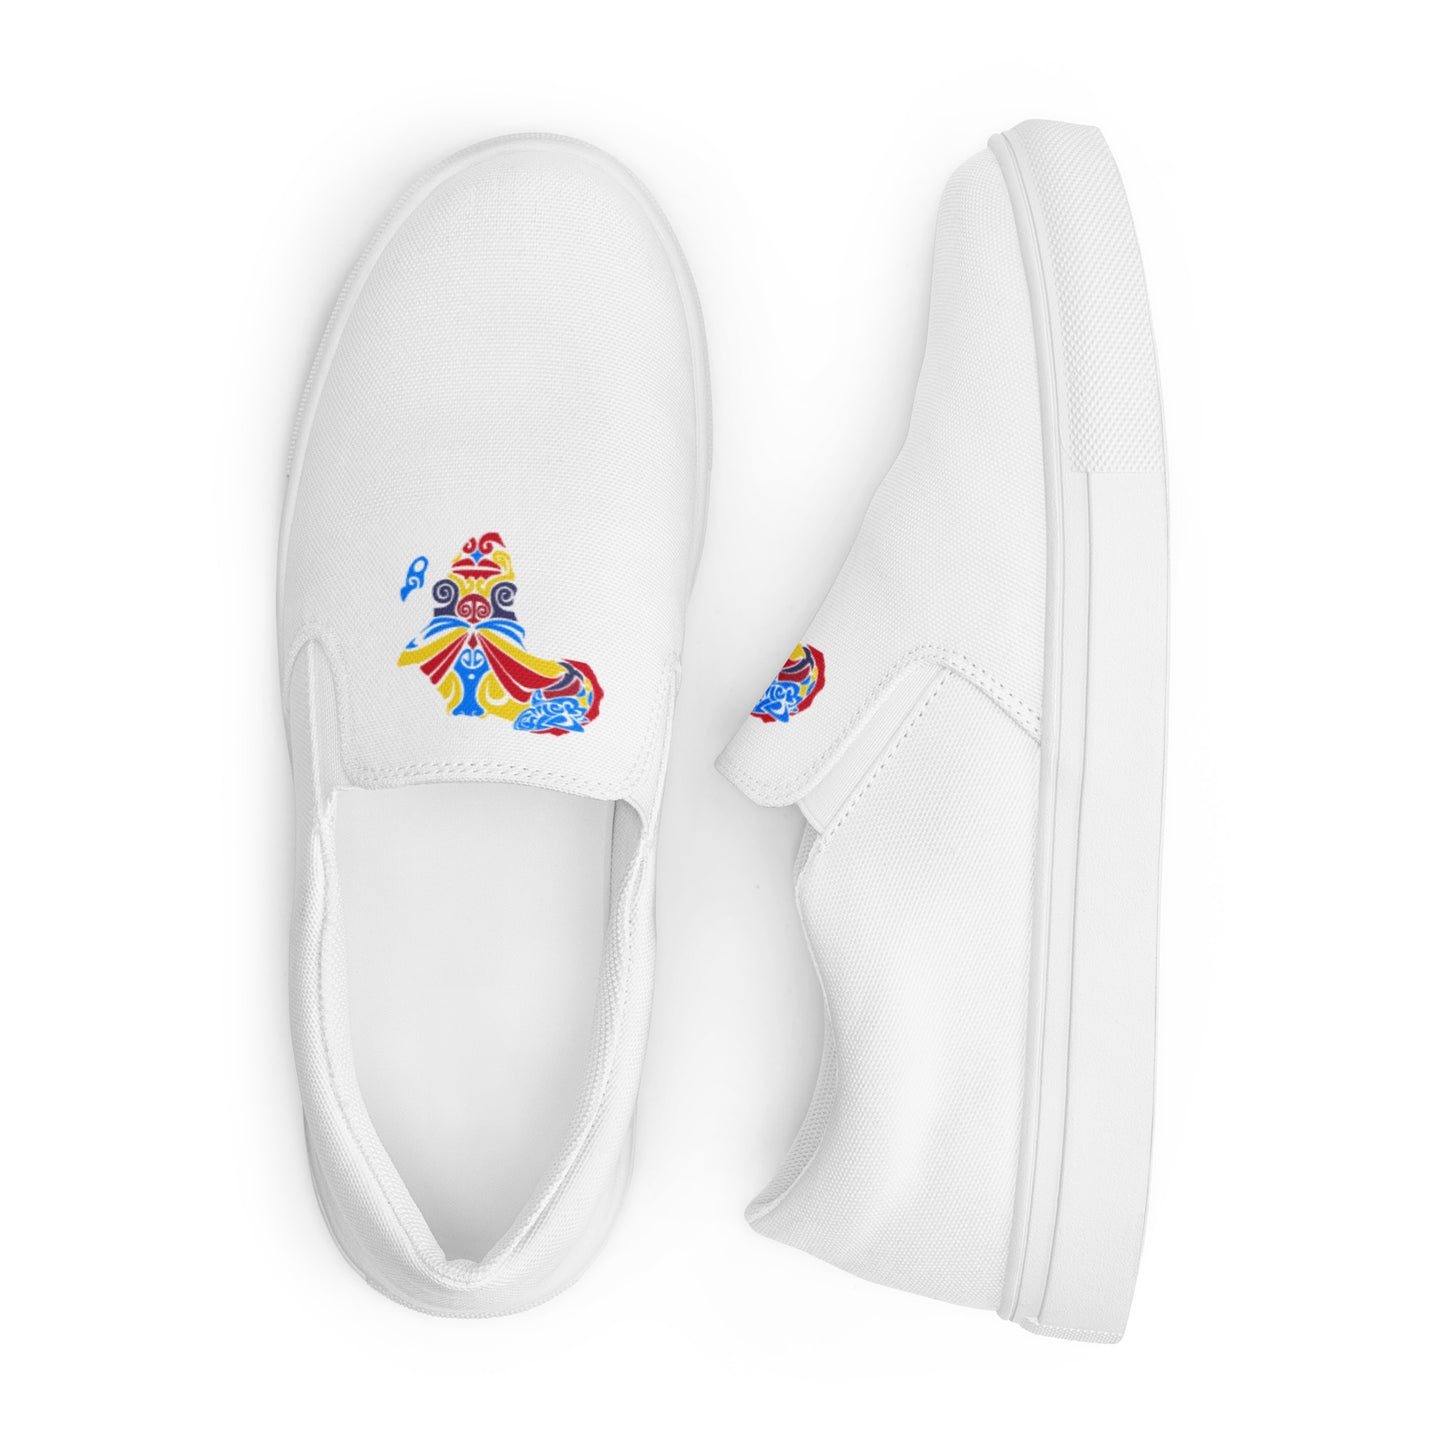 Women’s Slip-on Canvas Shoes - Banamerica Collection